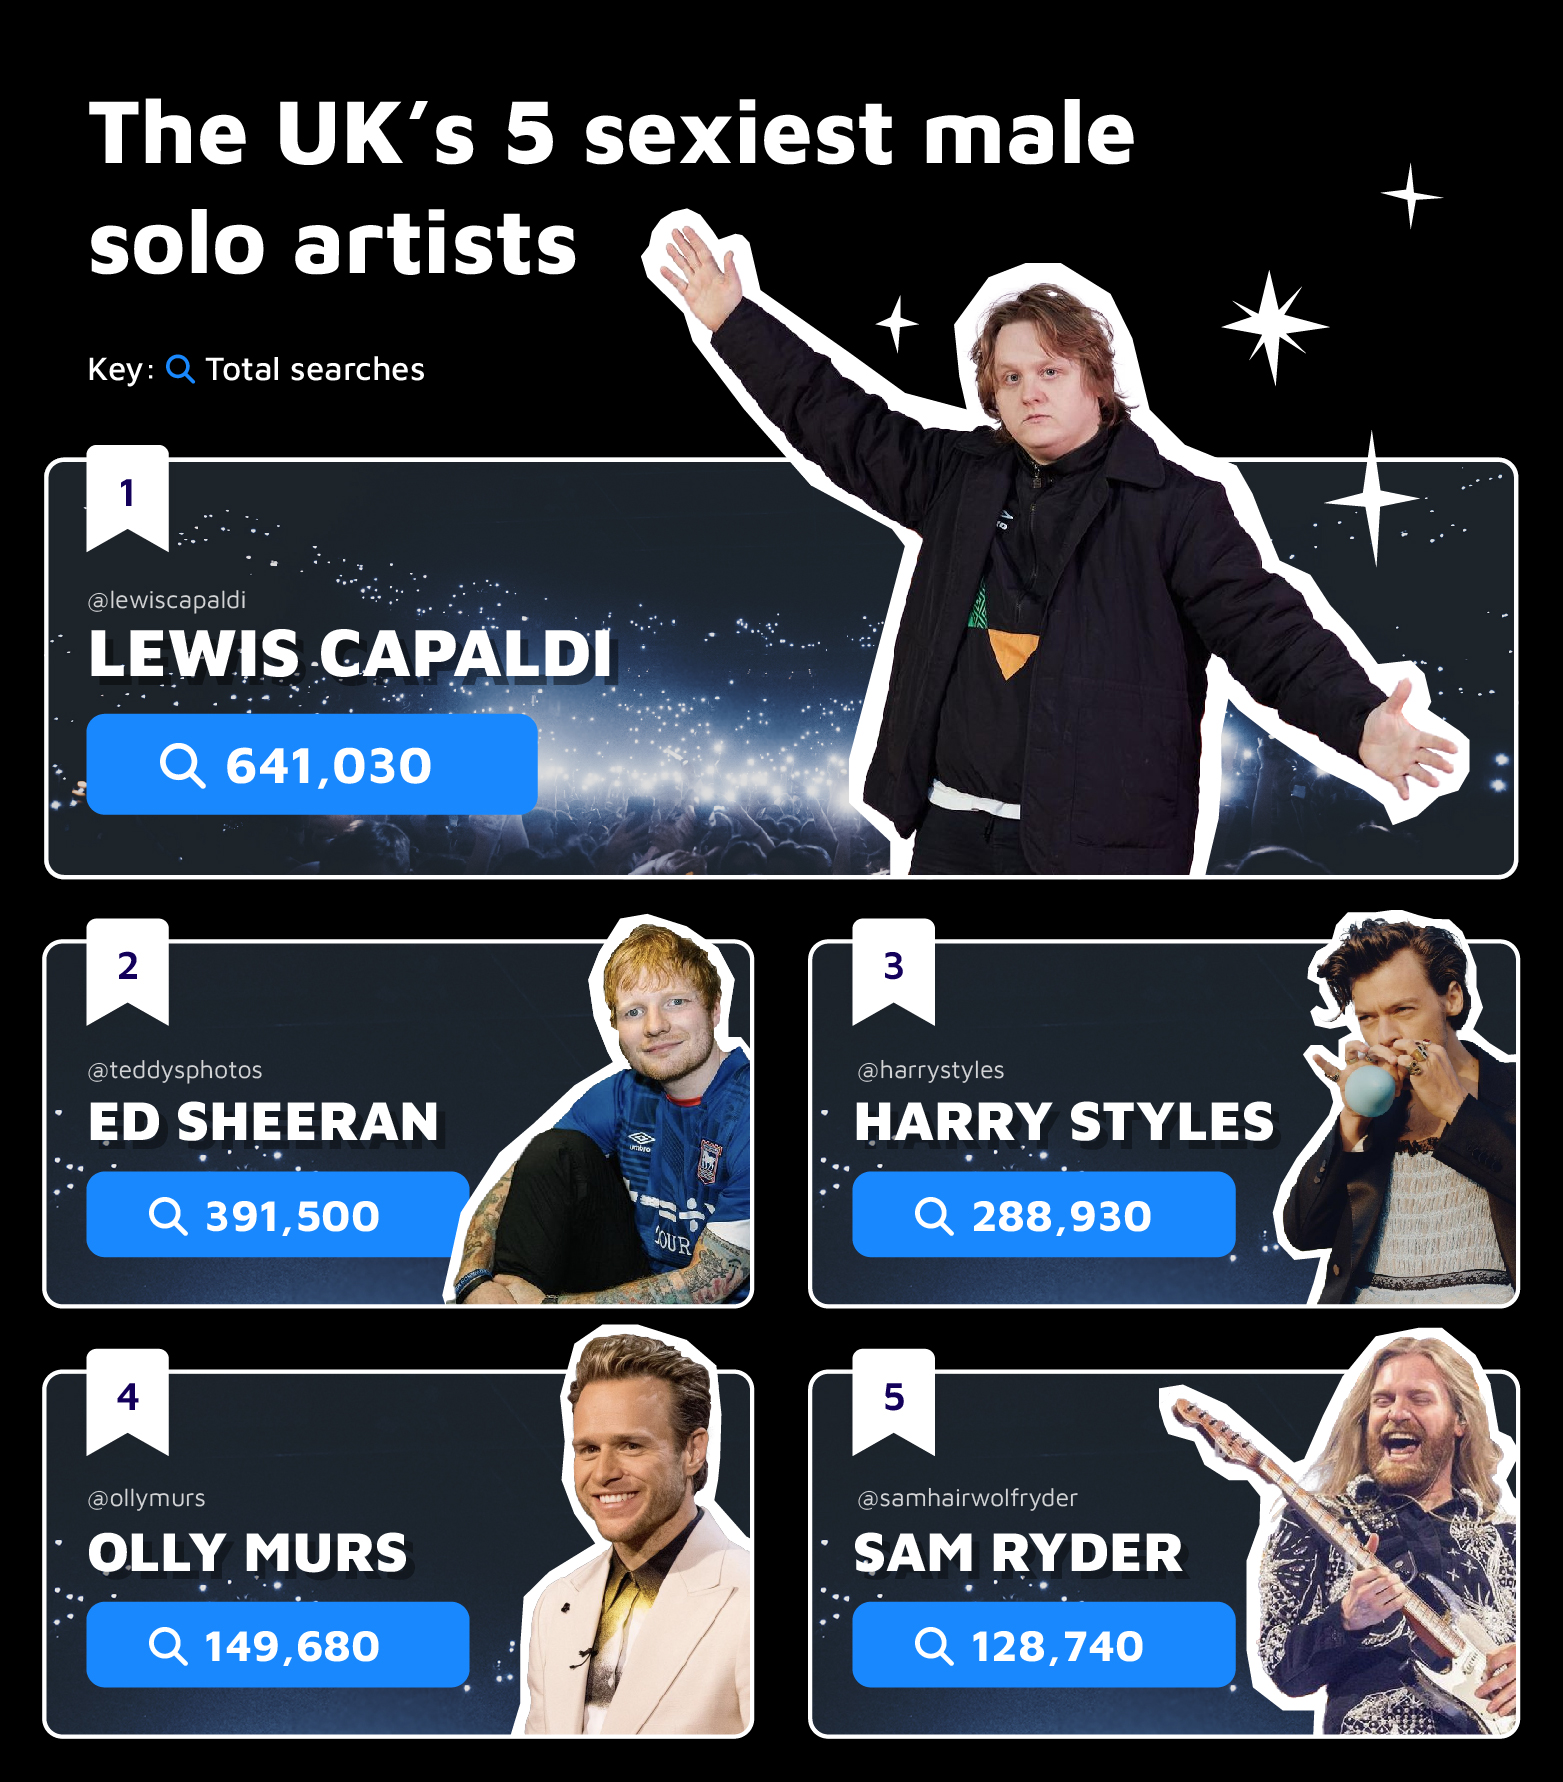 Top 5 Sexiest Male Solo Artists UK